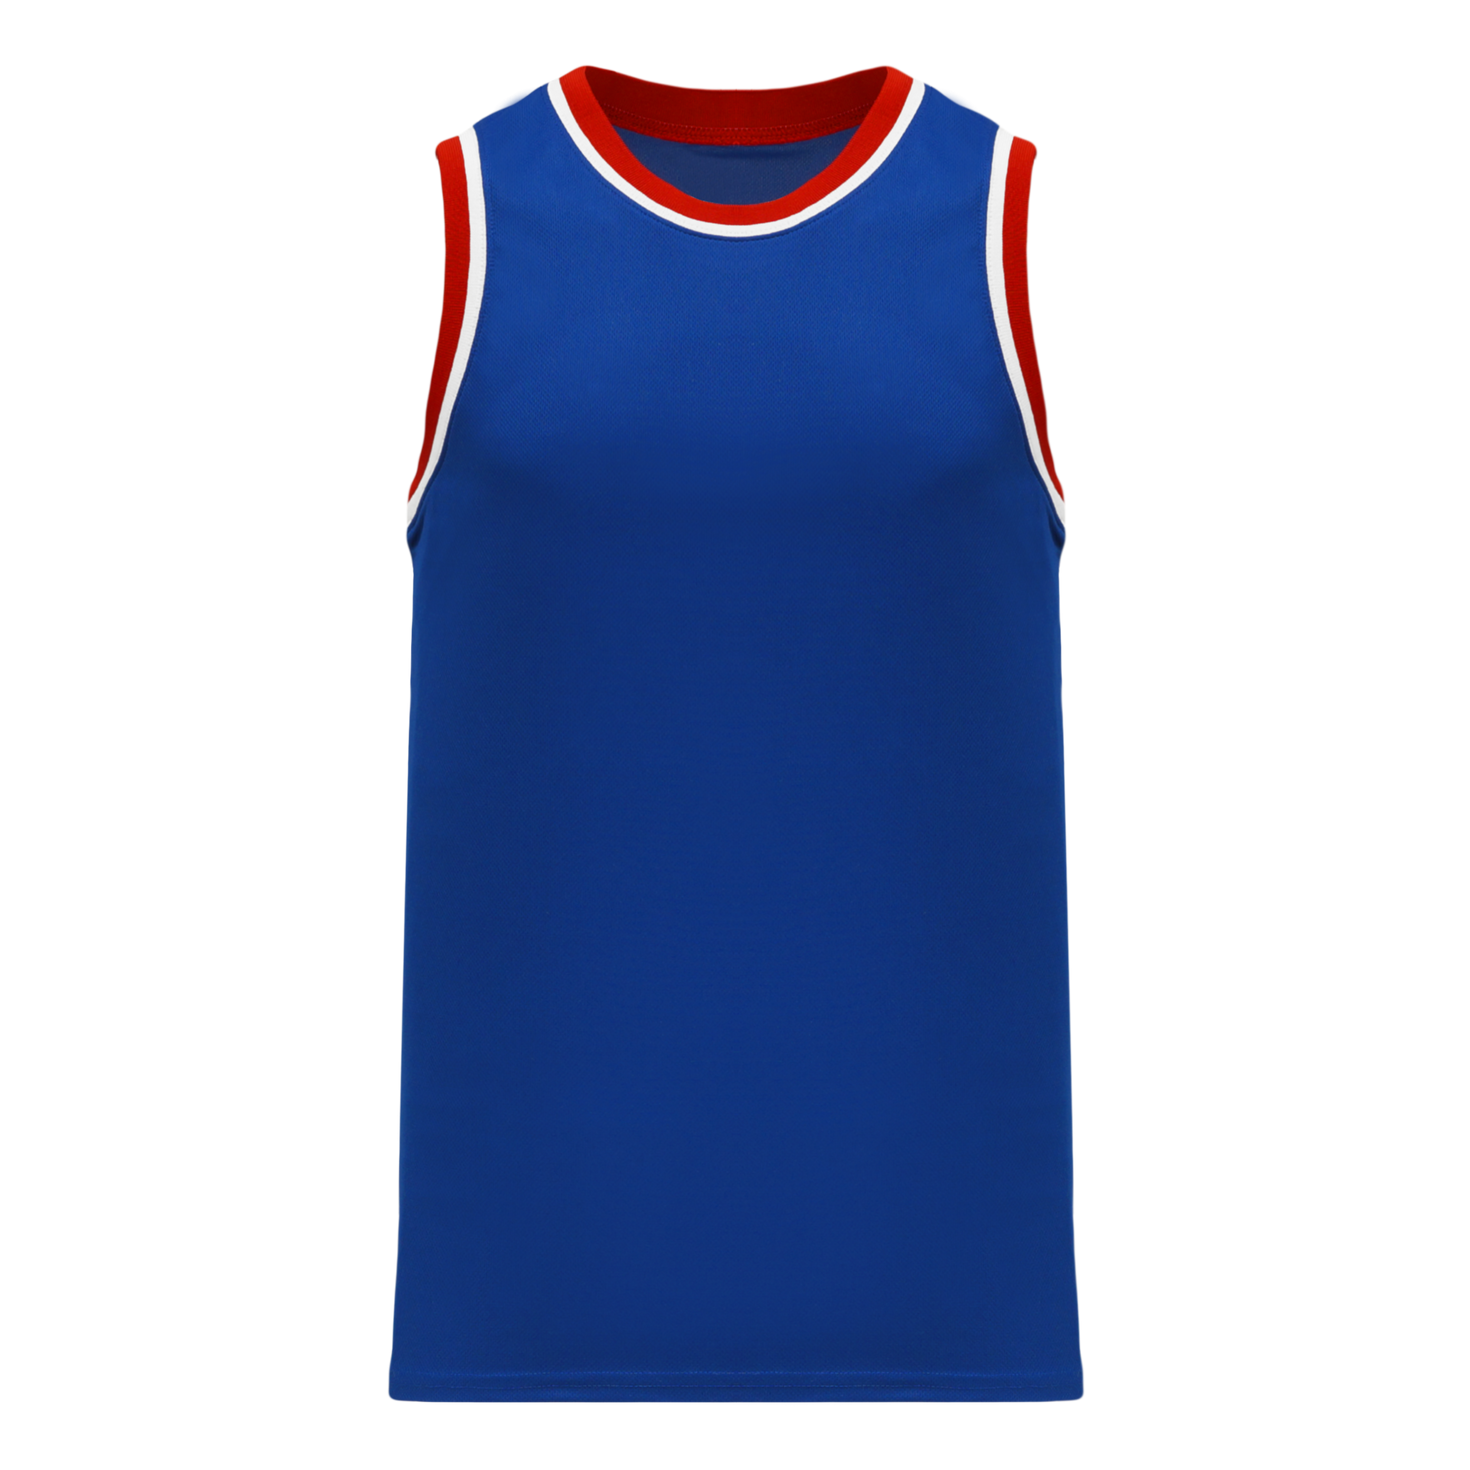 Athletic Knit Pro Cut Basketball Jersey with Knitted Trim | Basketball ...